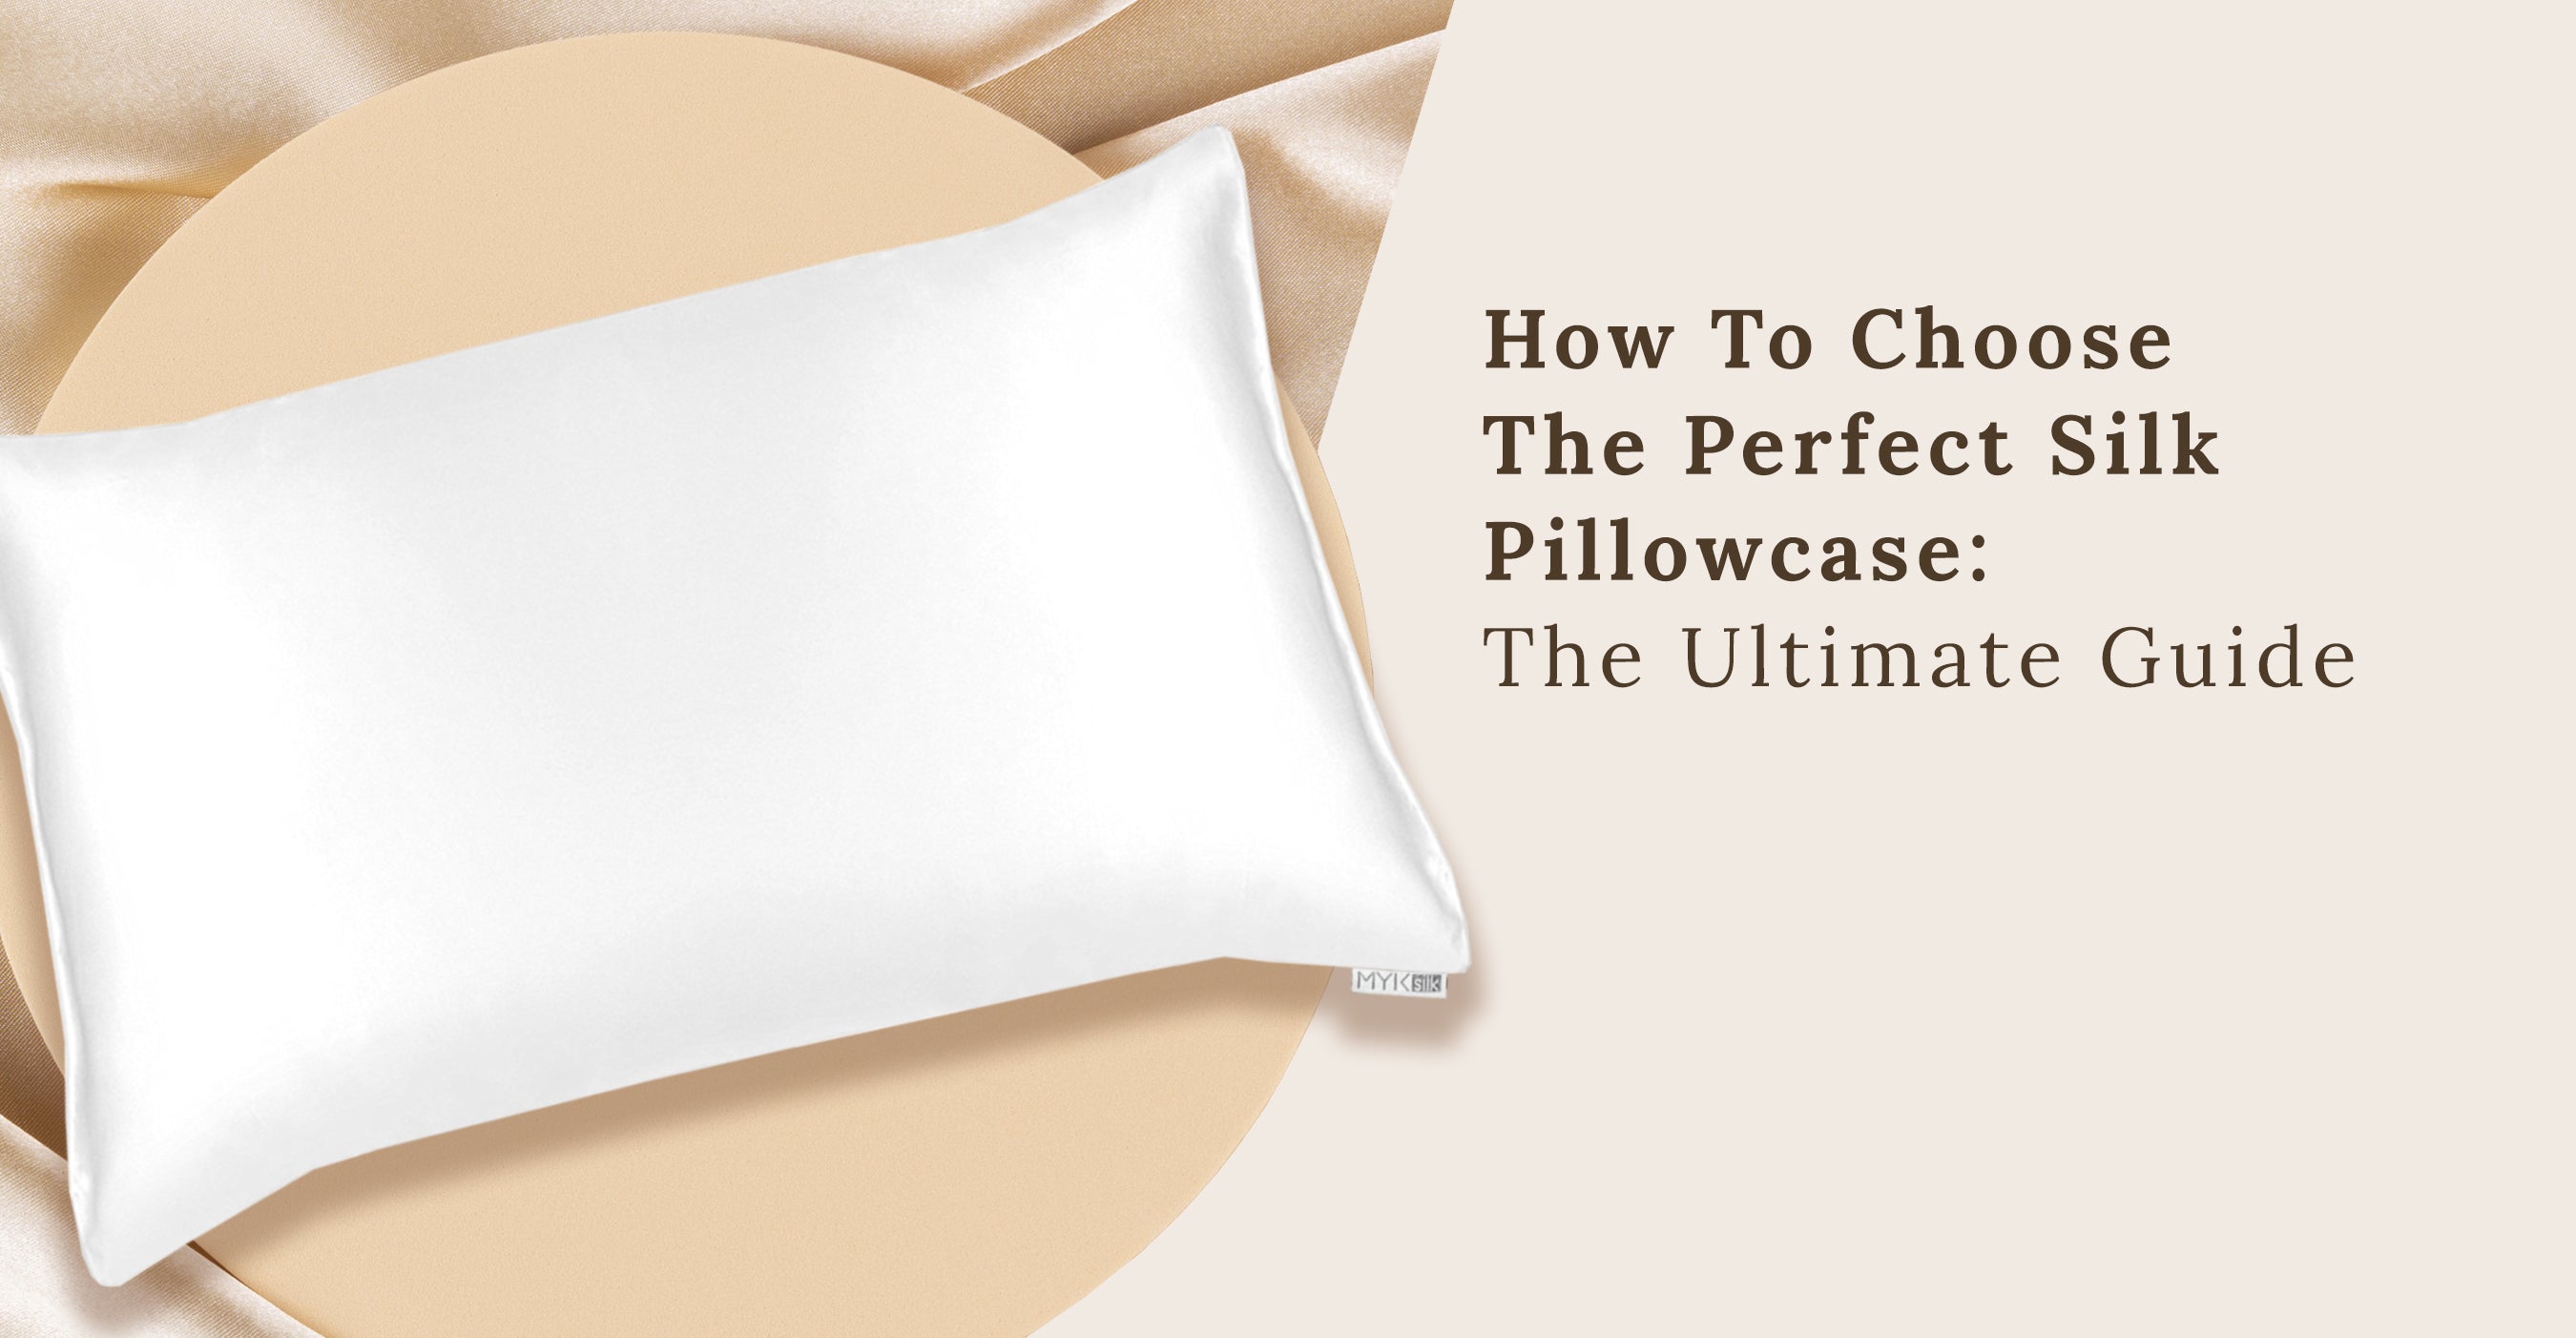 How to Choose the Perfect Silk Pillowcase